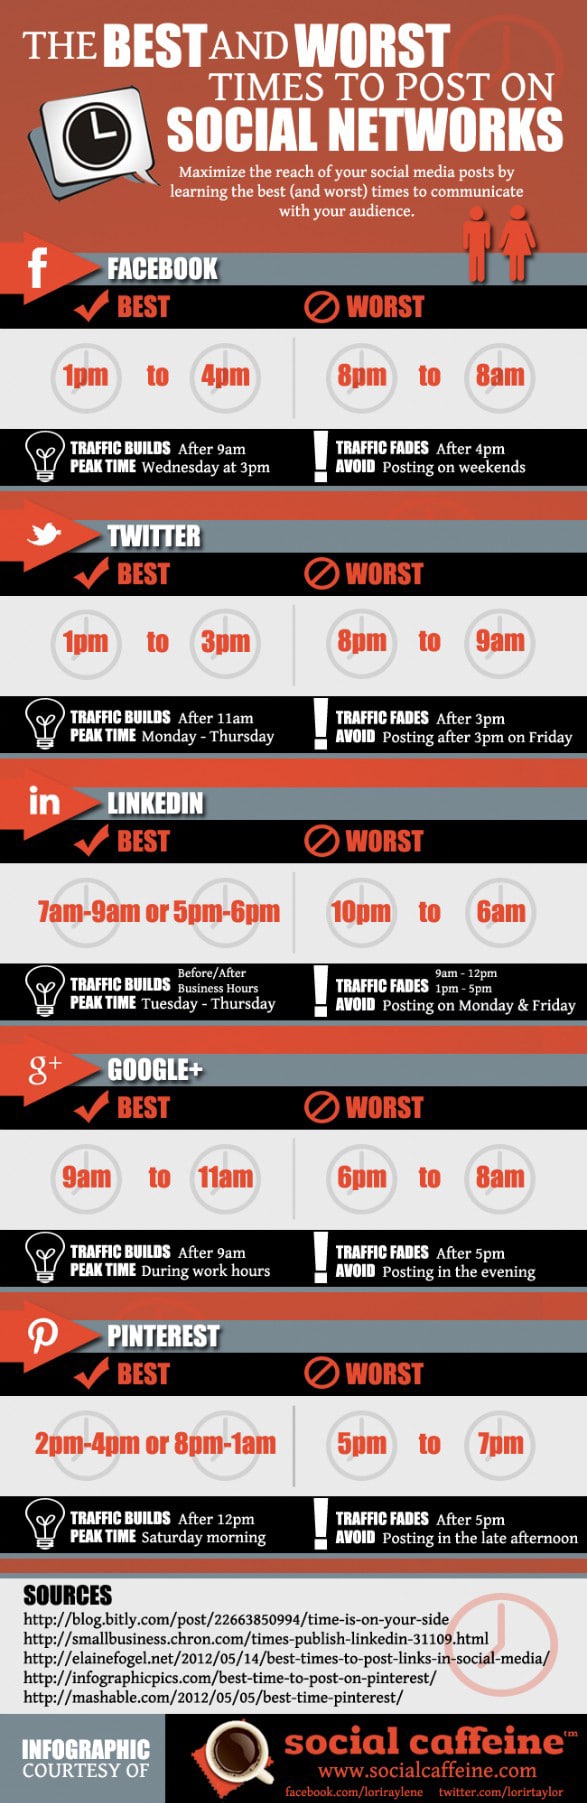 Best and Worst Times to Post on Social Media